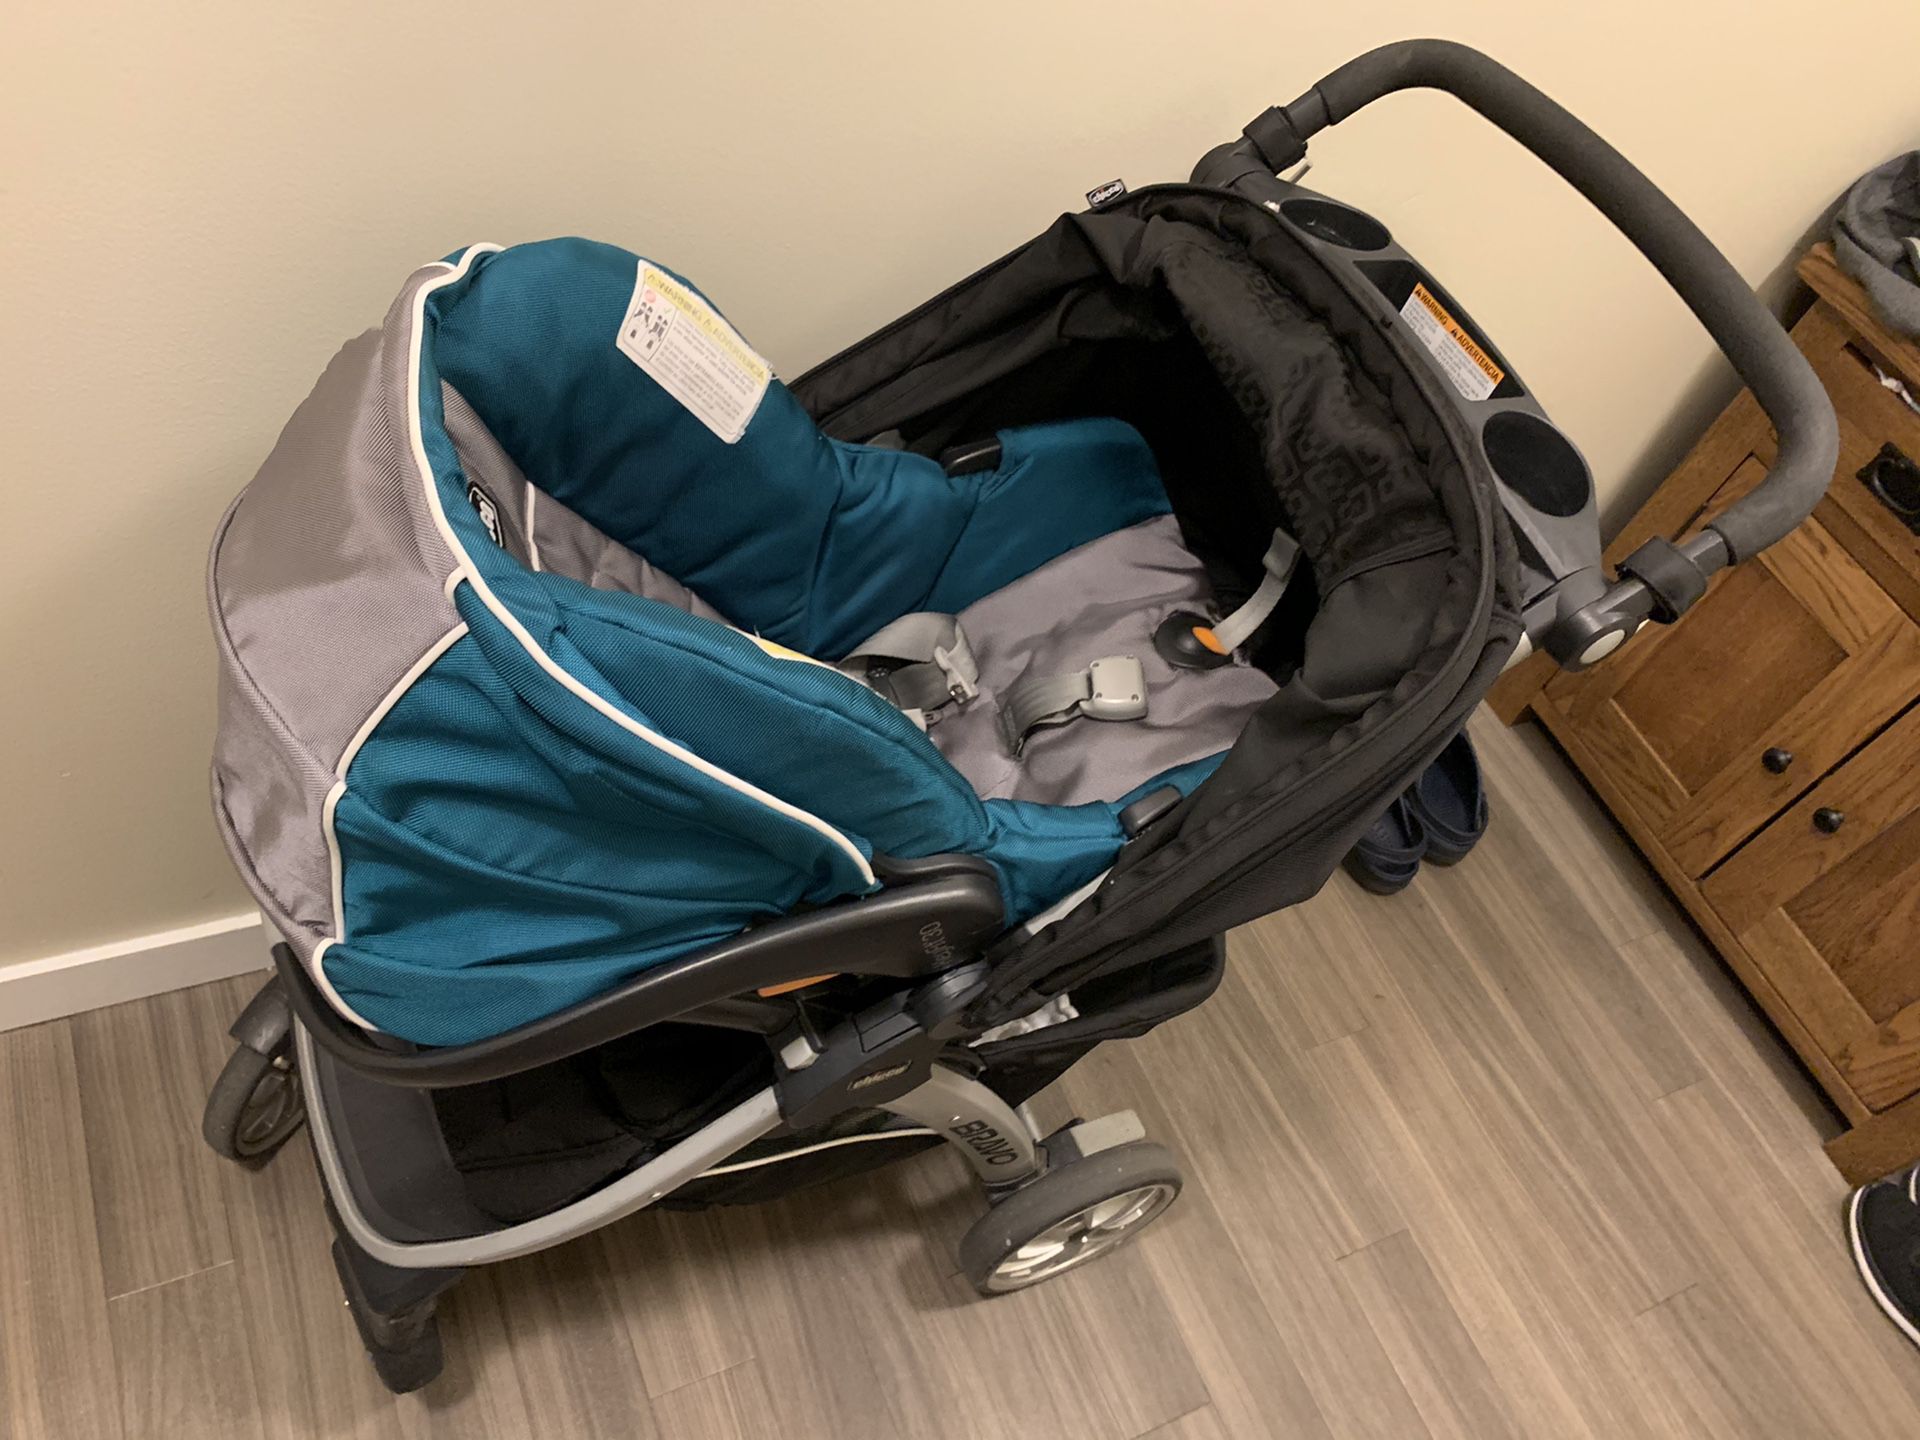 Chicco keyfit 30 car seat, bravo stroller and two car seat bases. Complete travel system!